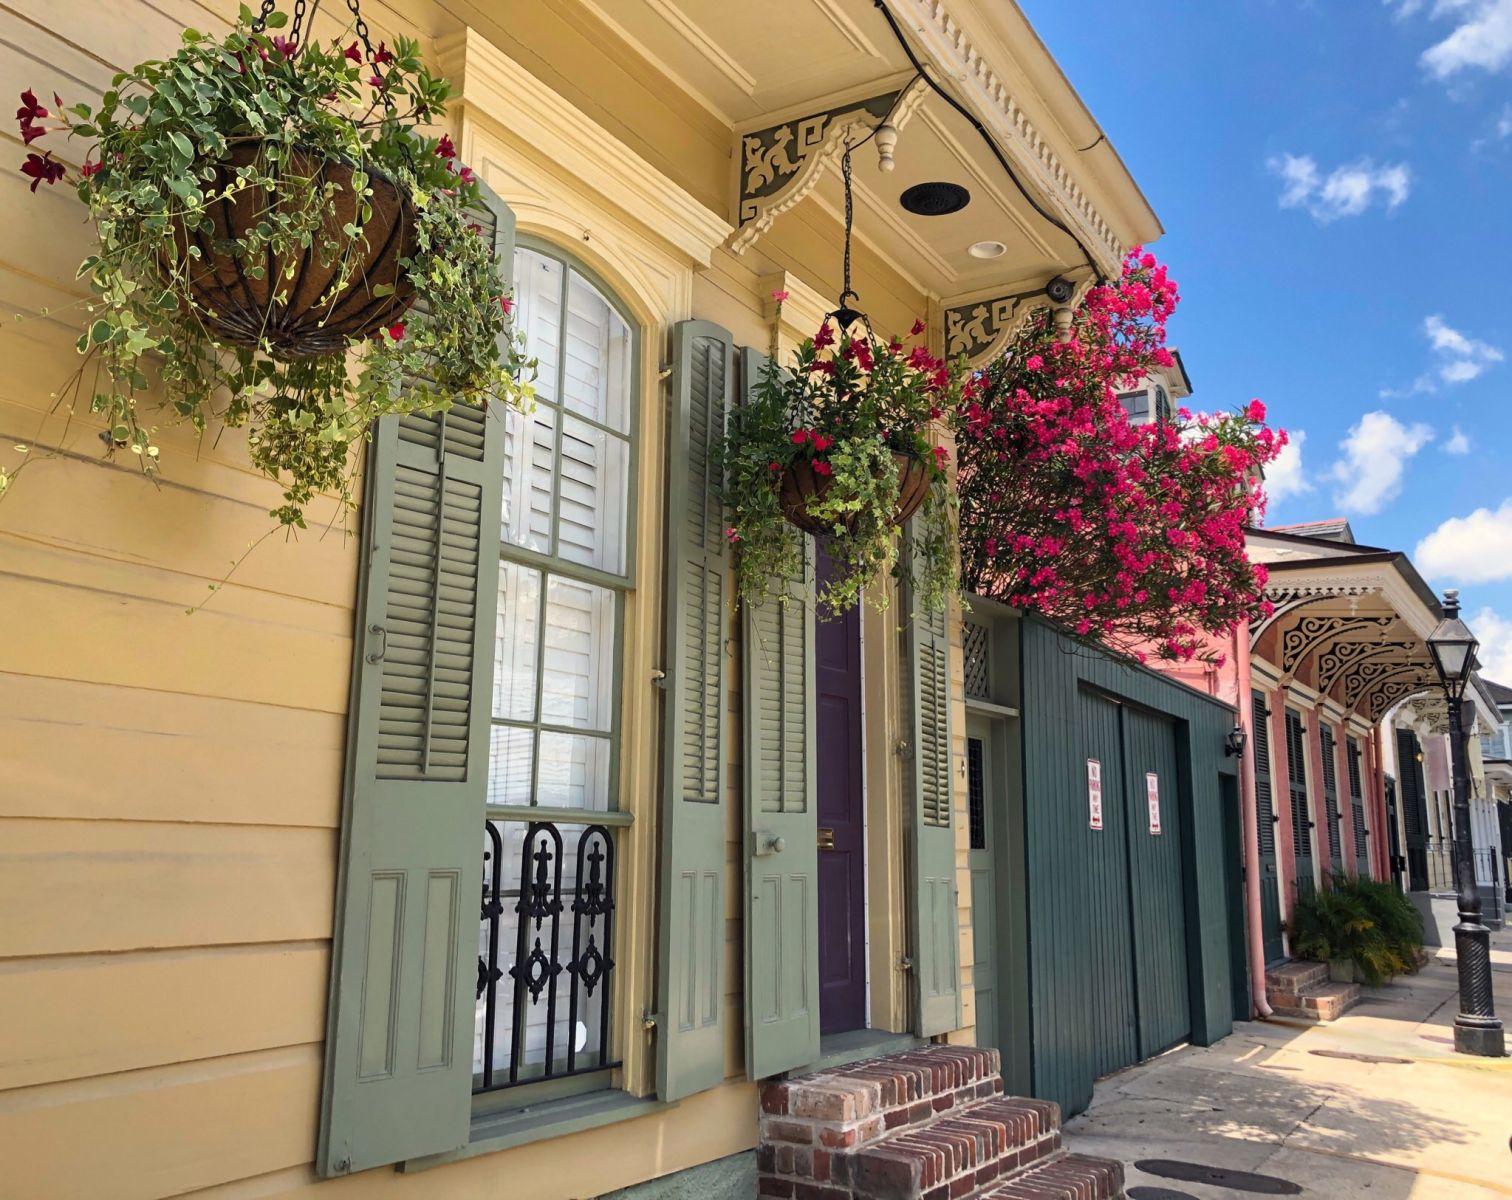 9 Reasons New Orleans Is a Better Choice for Spring Break Experience